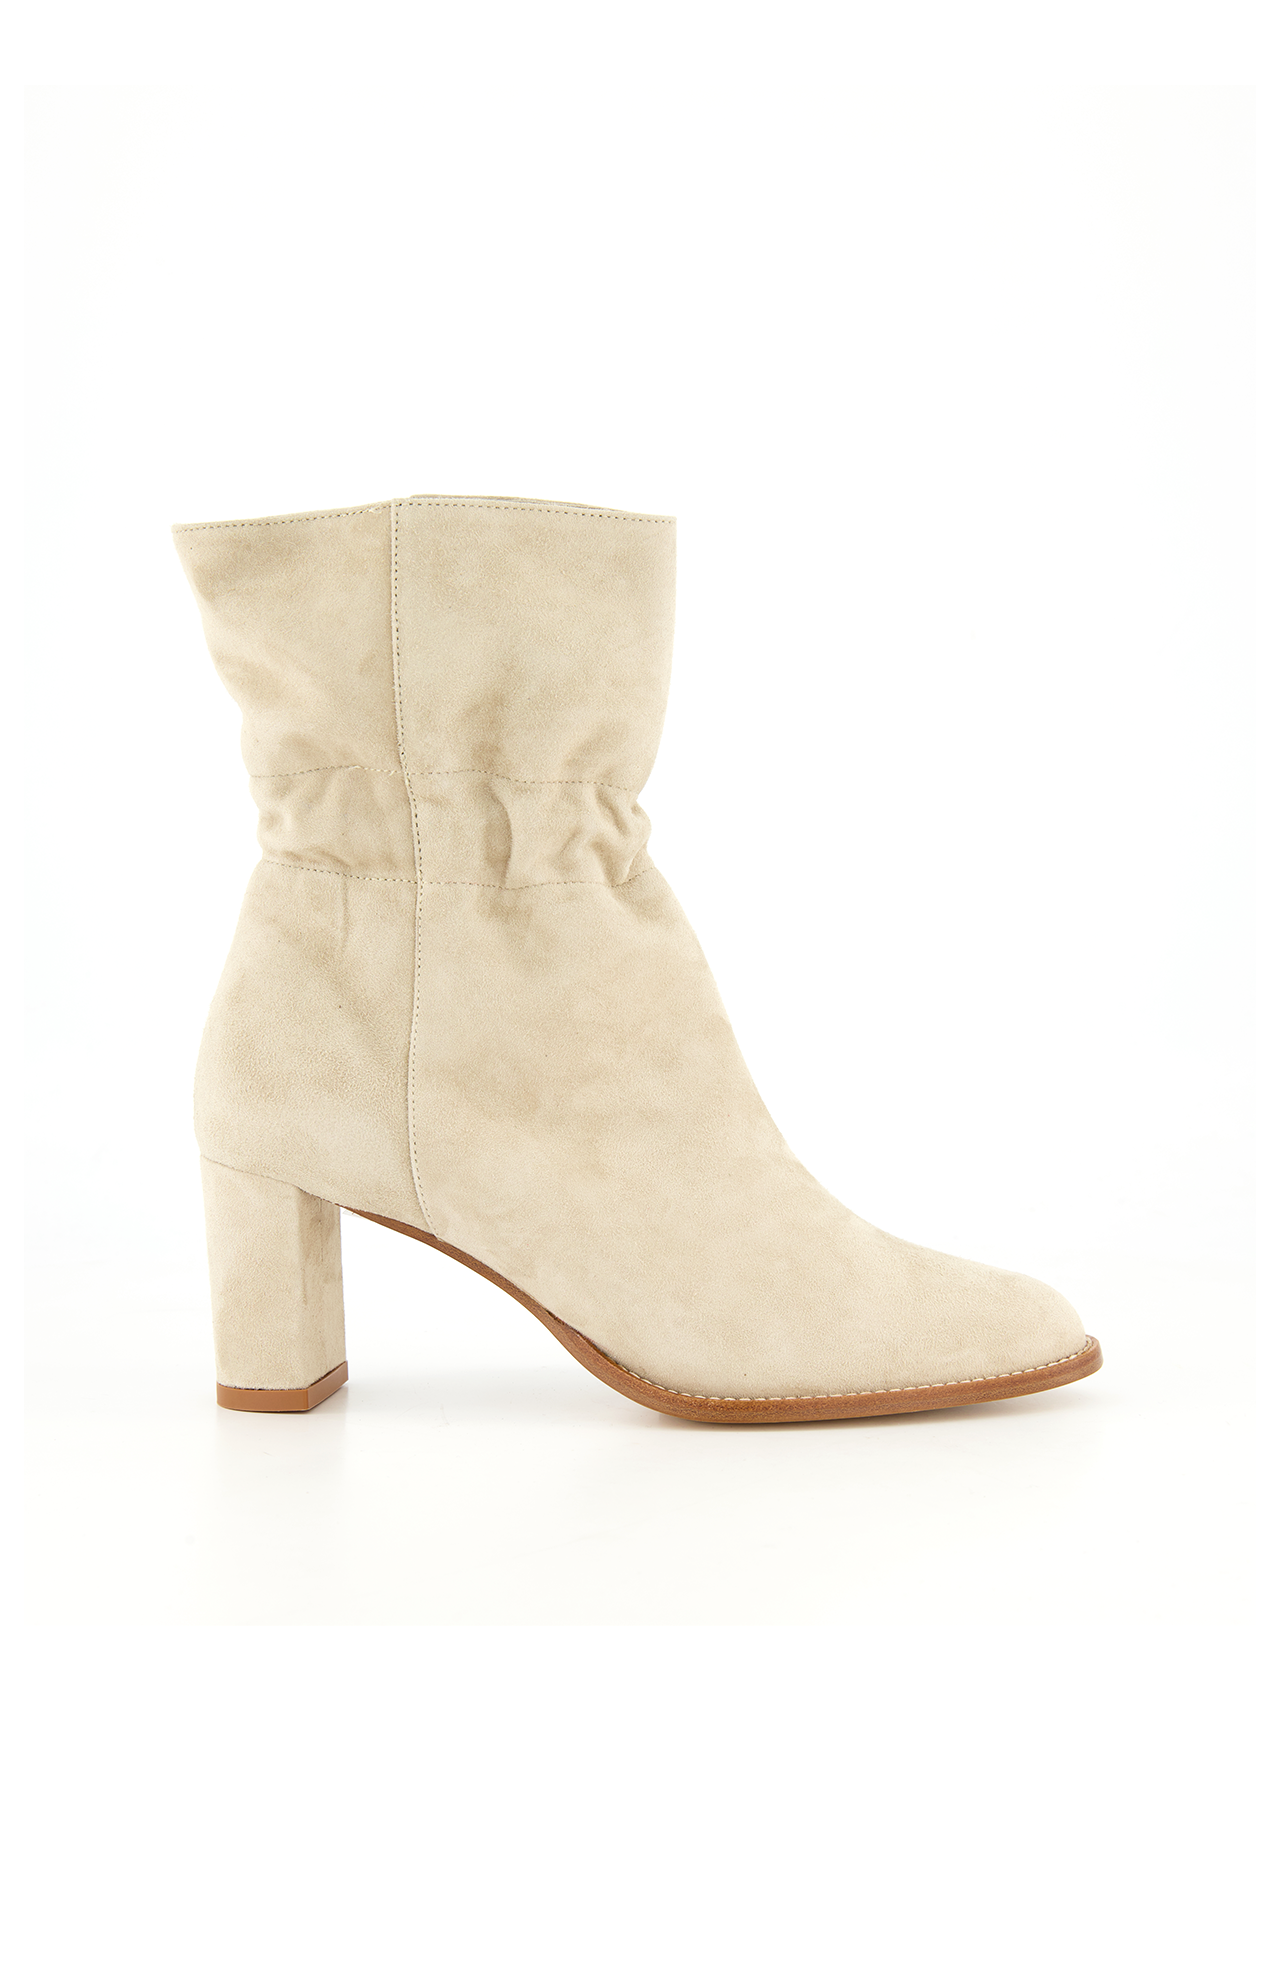 Marion Parke Lola 70 Bootie Right Side Profile Image (6977037107315)